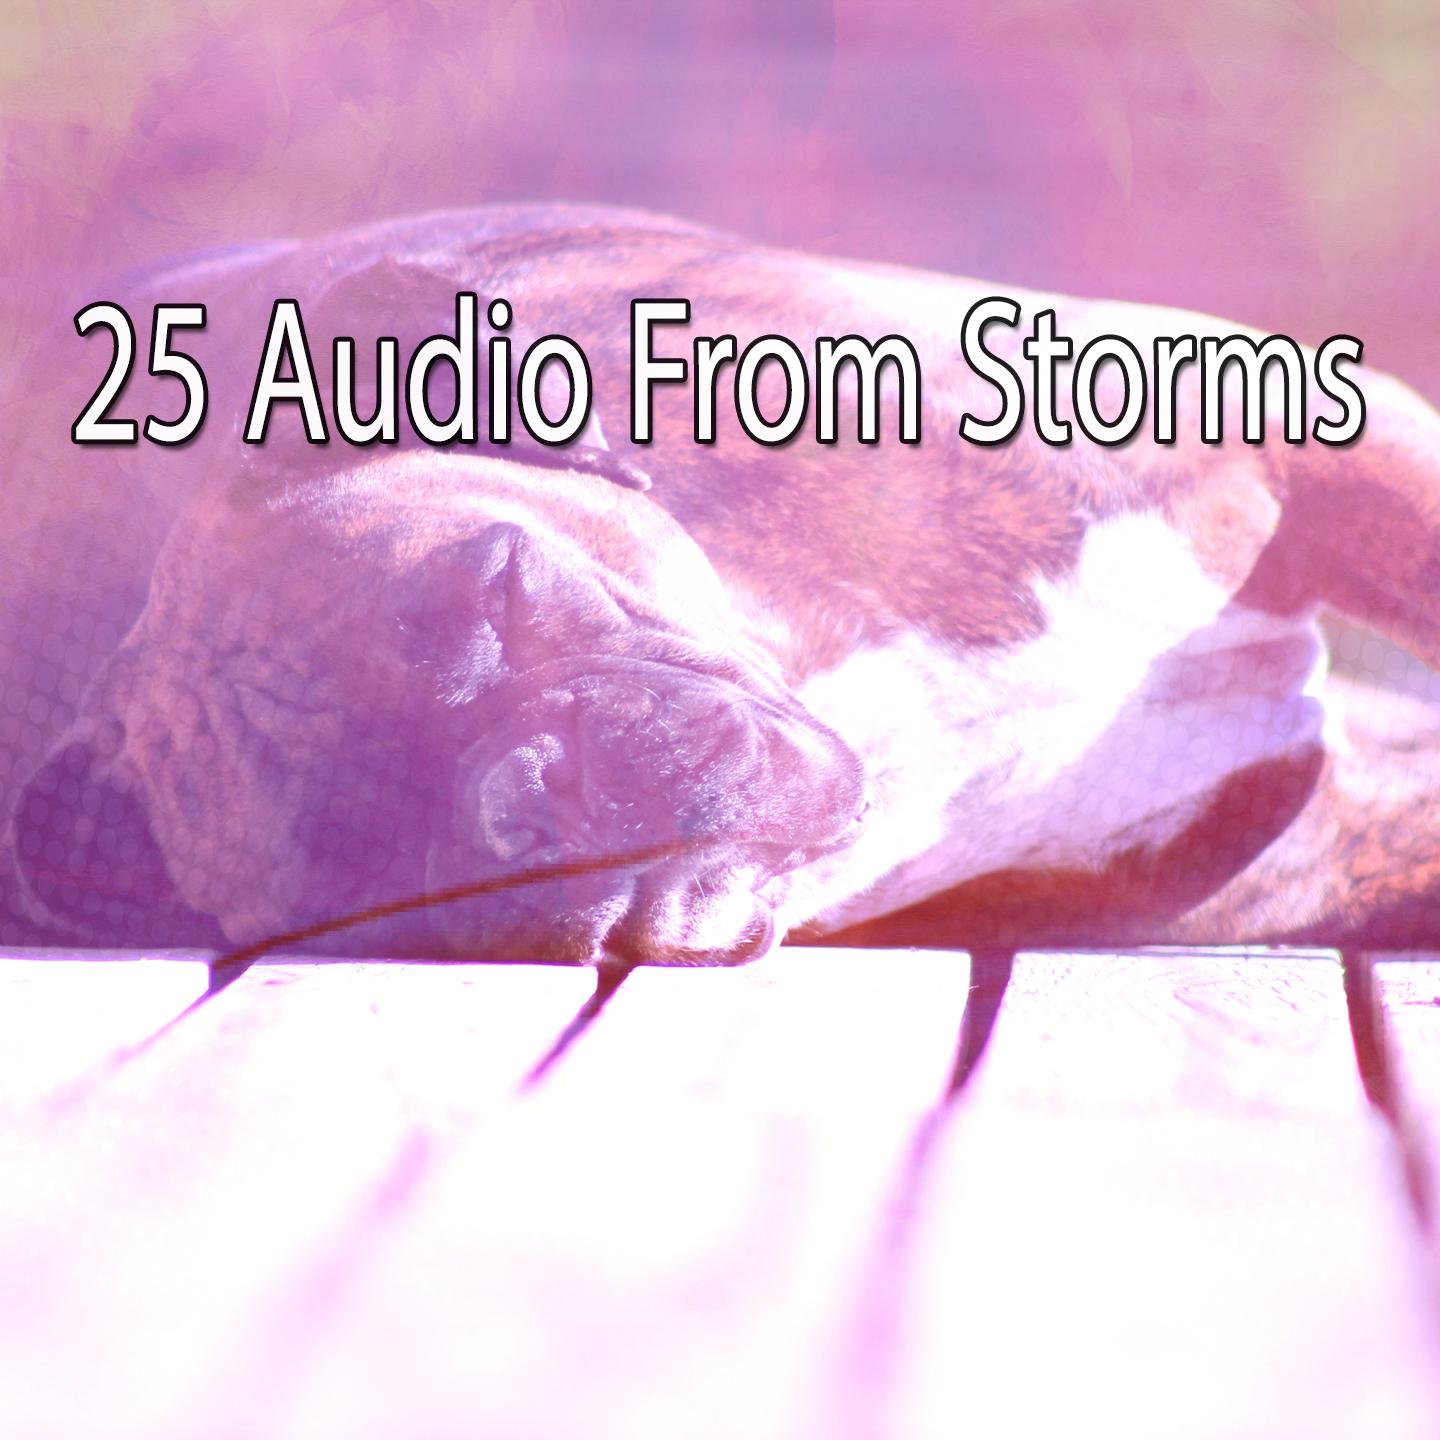 25 Audio From Storms